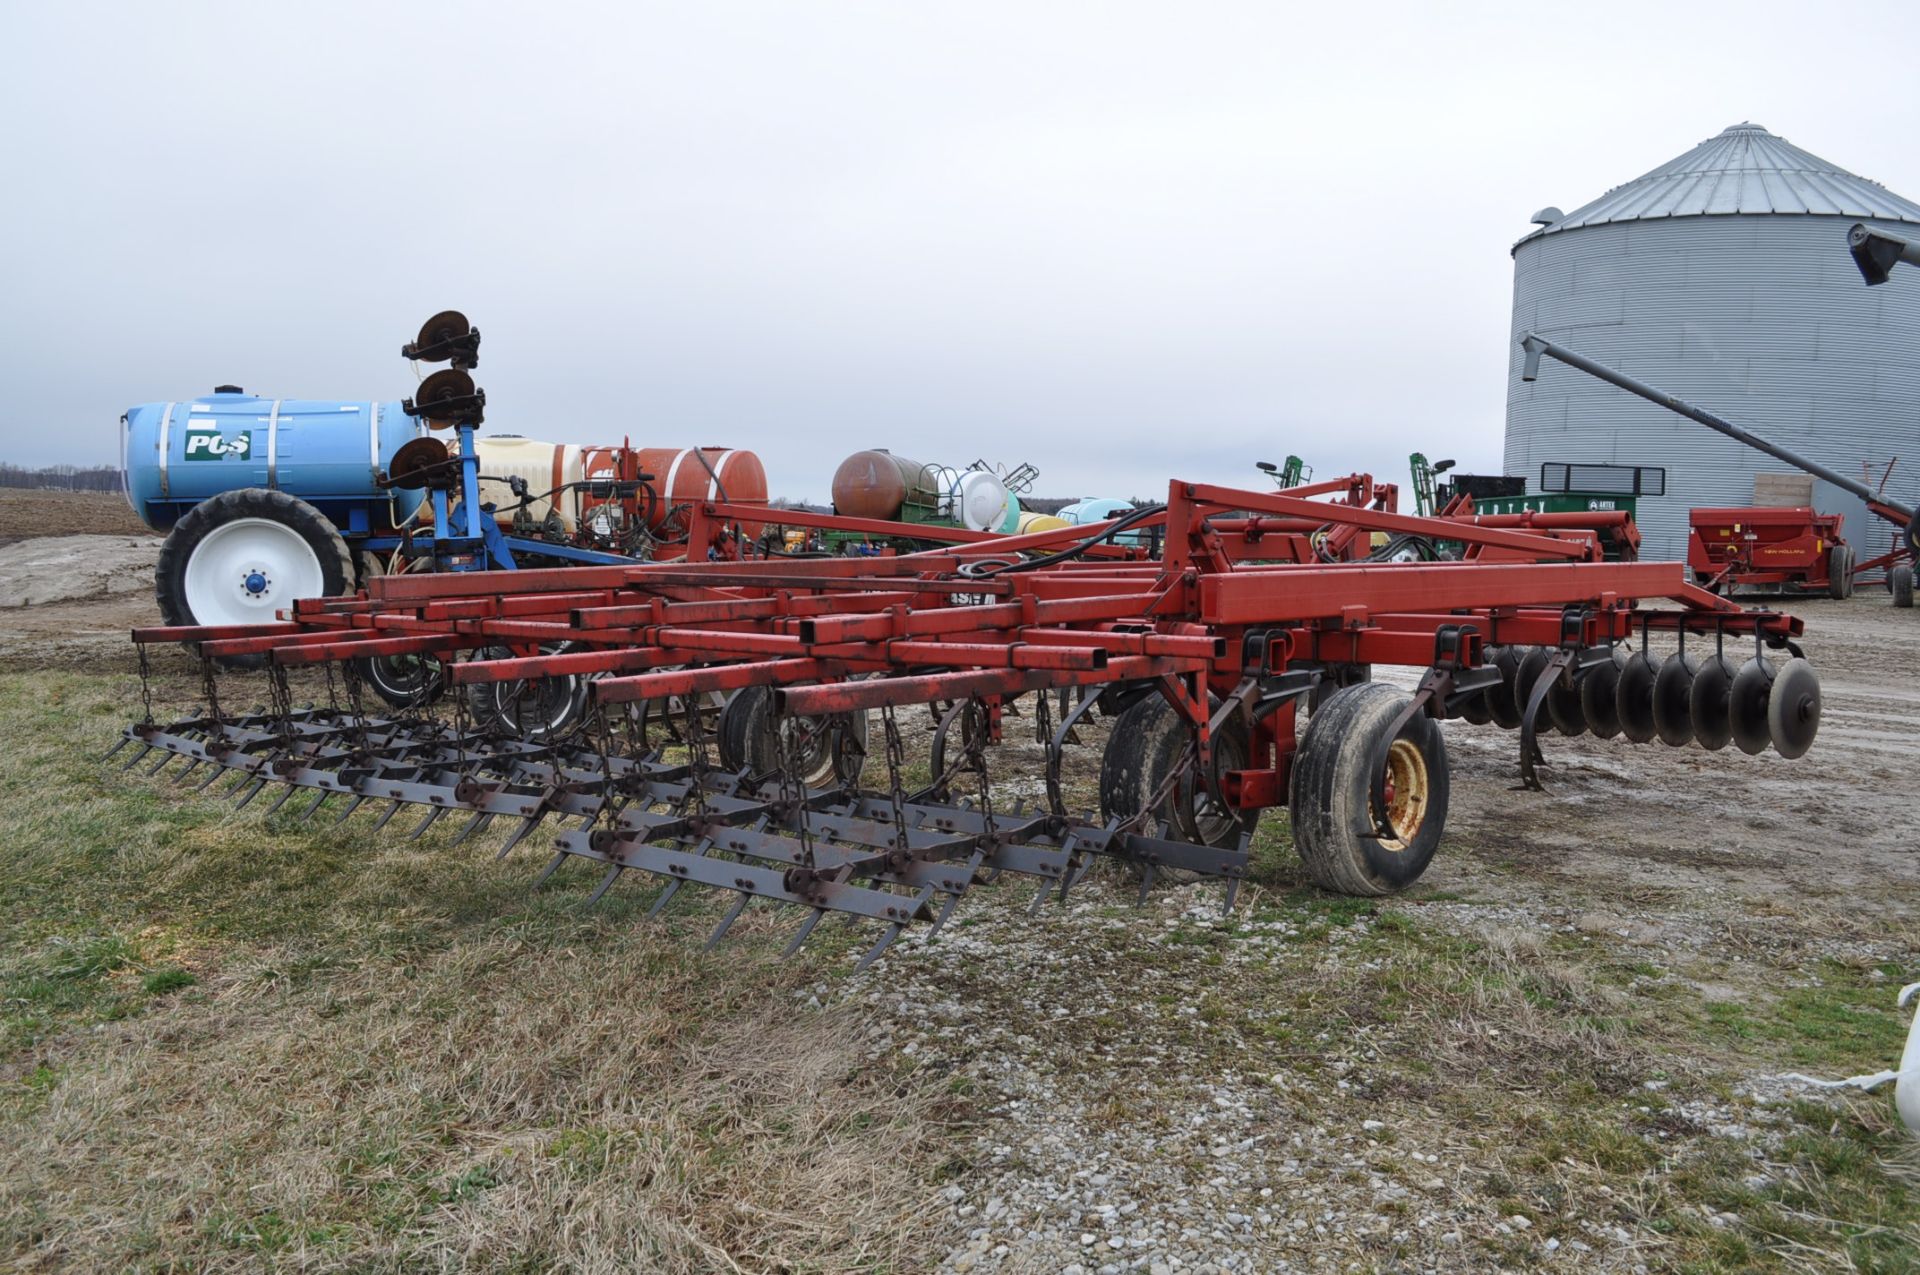 15’ Case IH 4200 mulch finisher, front disc, 5 bar harrow, rear hitch, SN JAG0690325 - Image 3 of 12